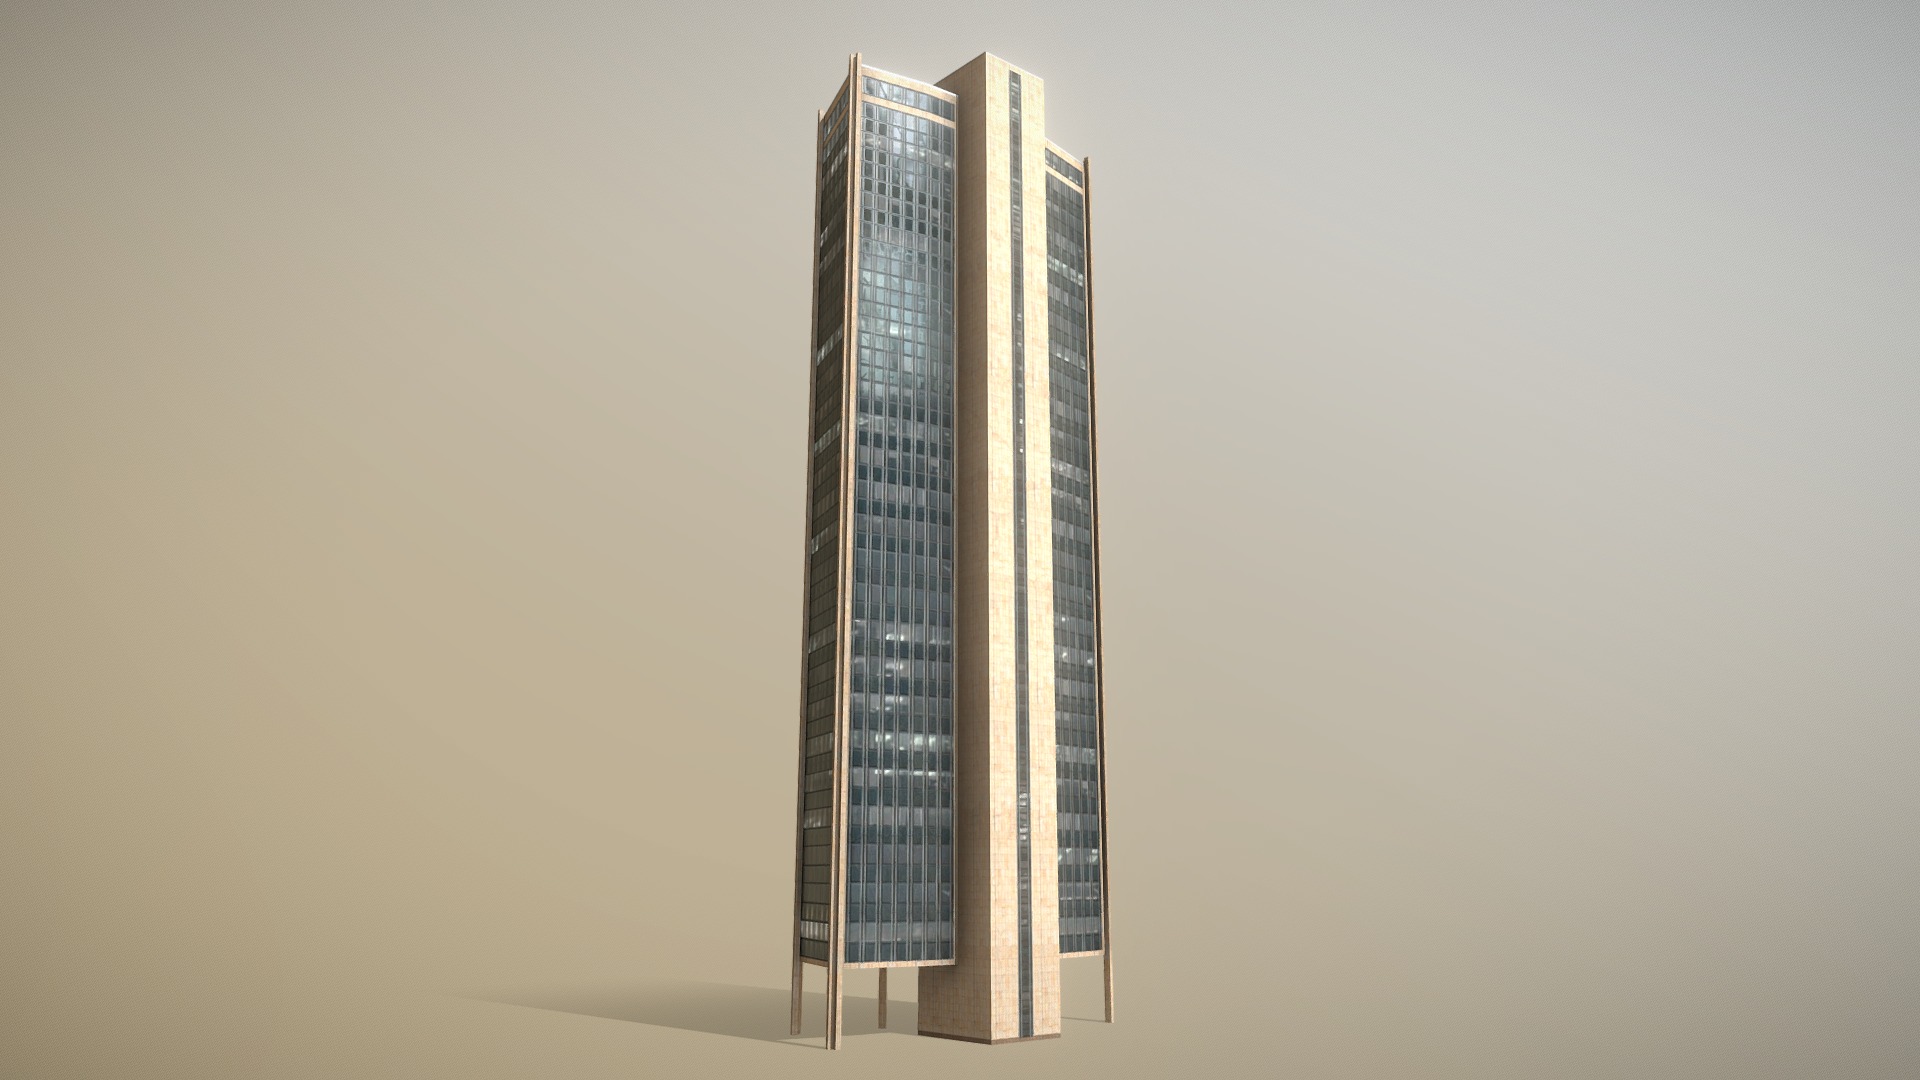 3D model Bogota Seguros Tequendama - This is a 3D model of the Bogota Seguros Tequendama. The 3D model is about a tall building with a glass front.